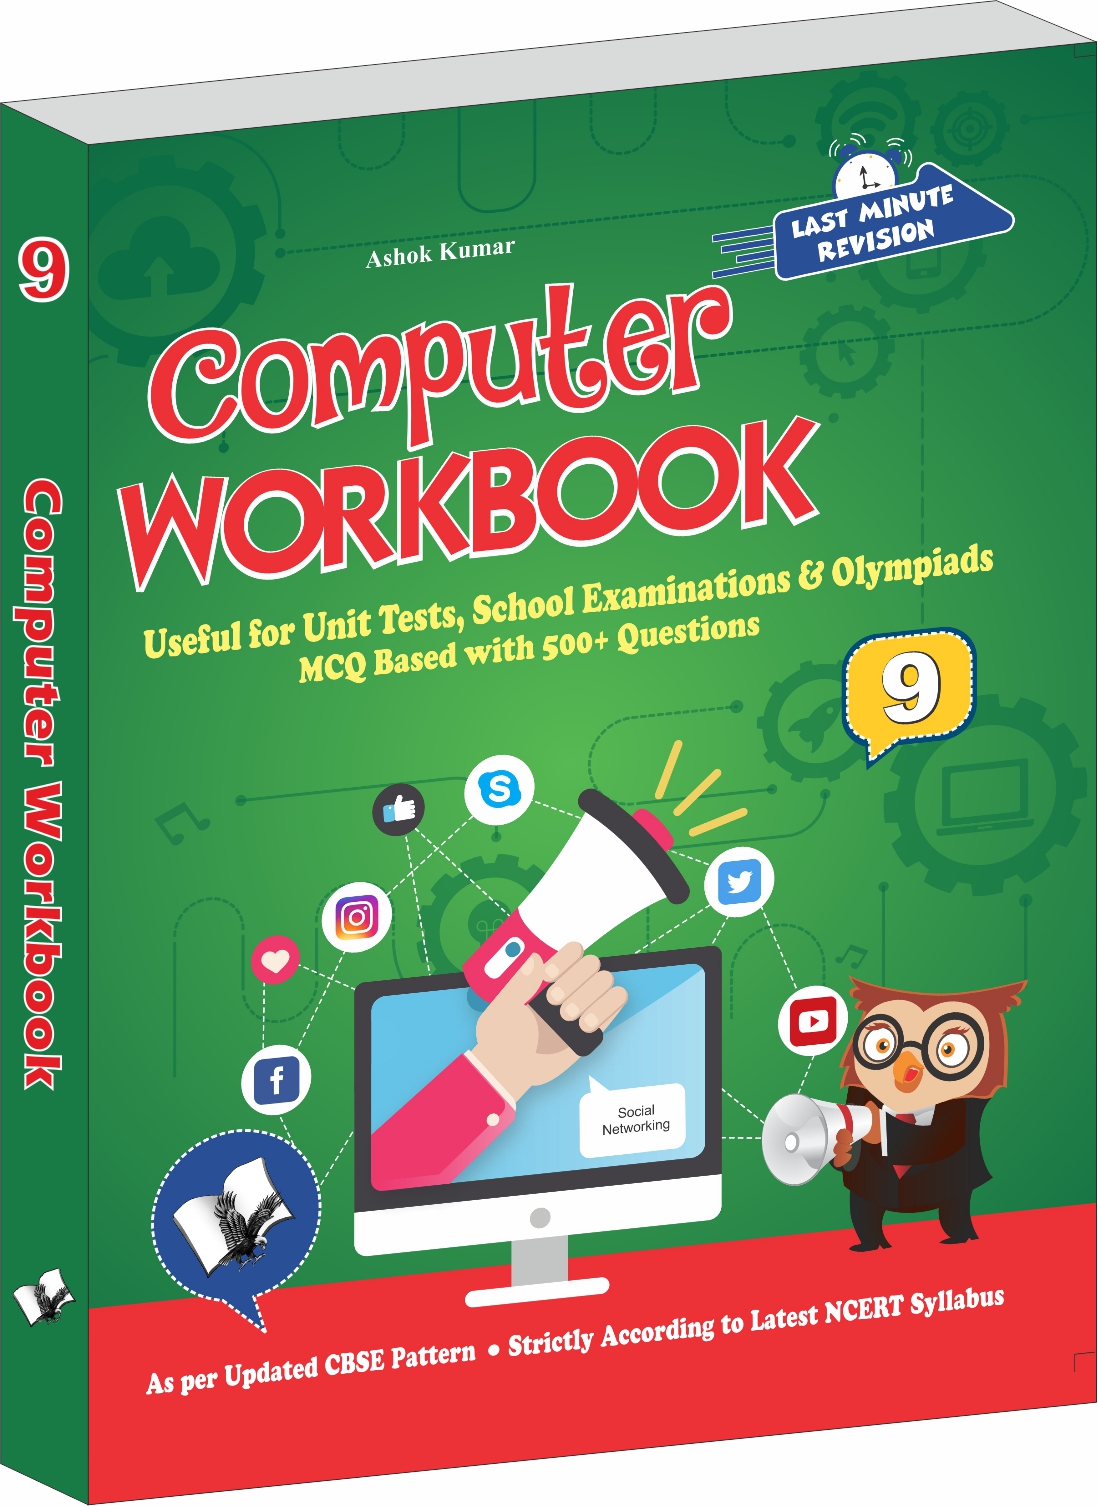 computer-workbook-class-9-useful-for-unit-tests-school-examinations-olympiads